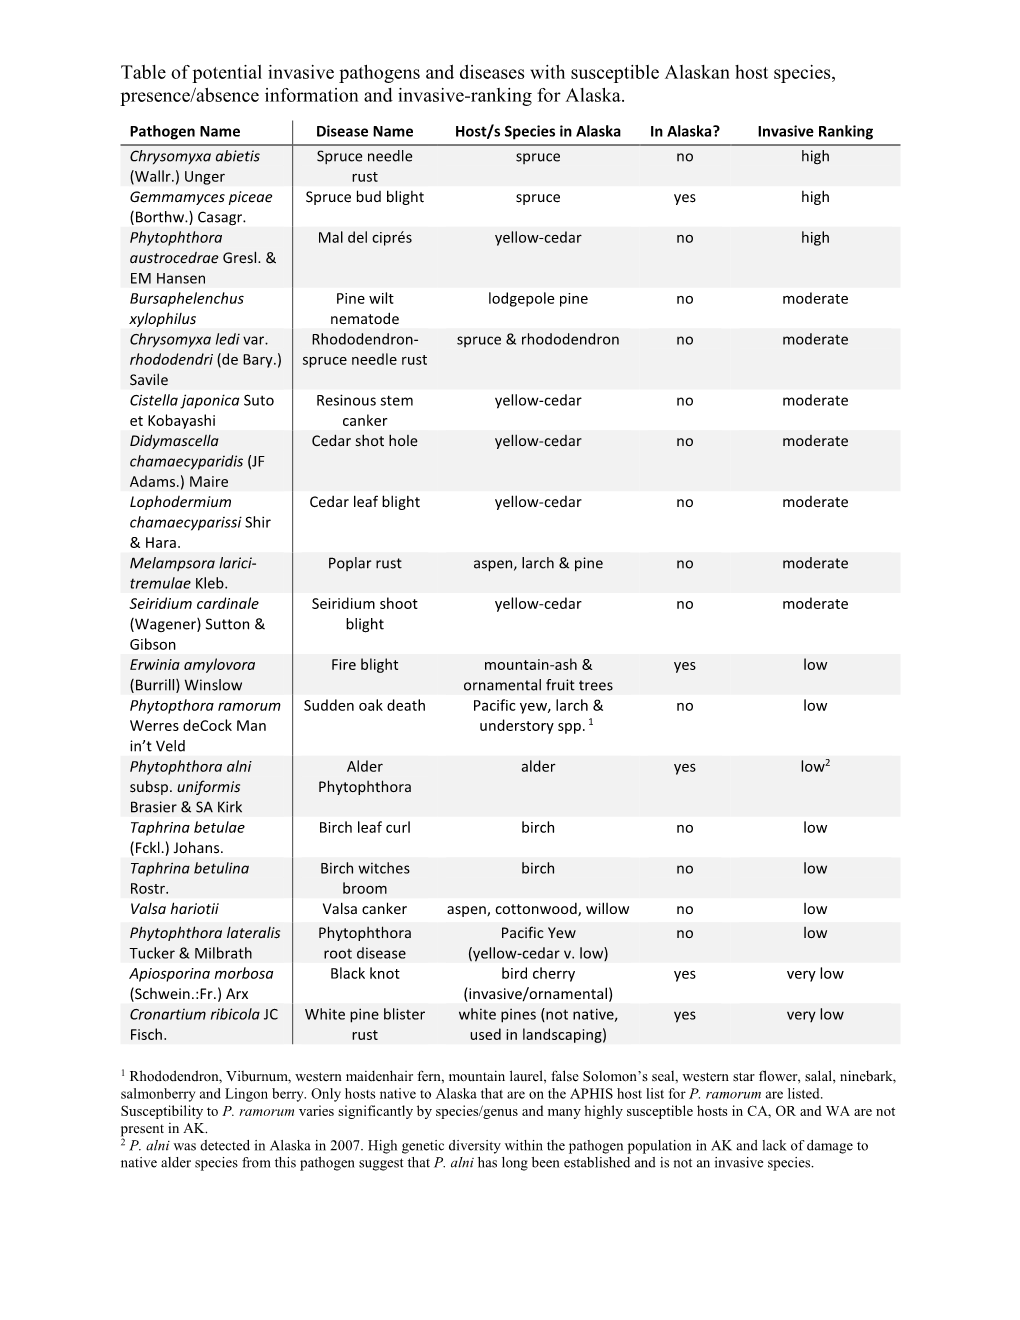 Table of Potential Invasive Pathogens and Diseases with Susceptible Alaskan Host Species, Presence/Absence Information and Invasive-Ranking for Alaska